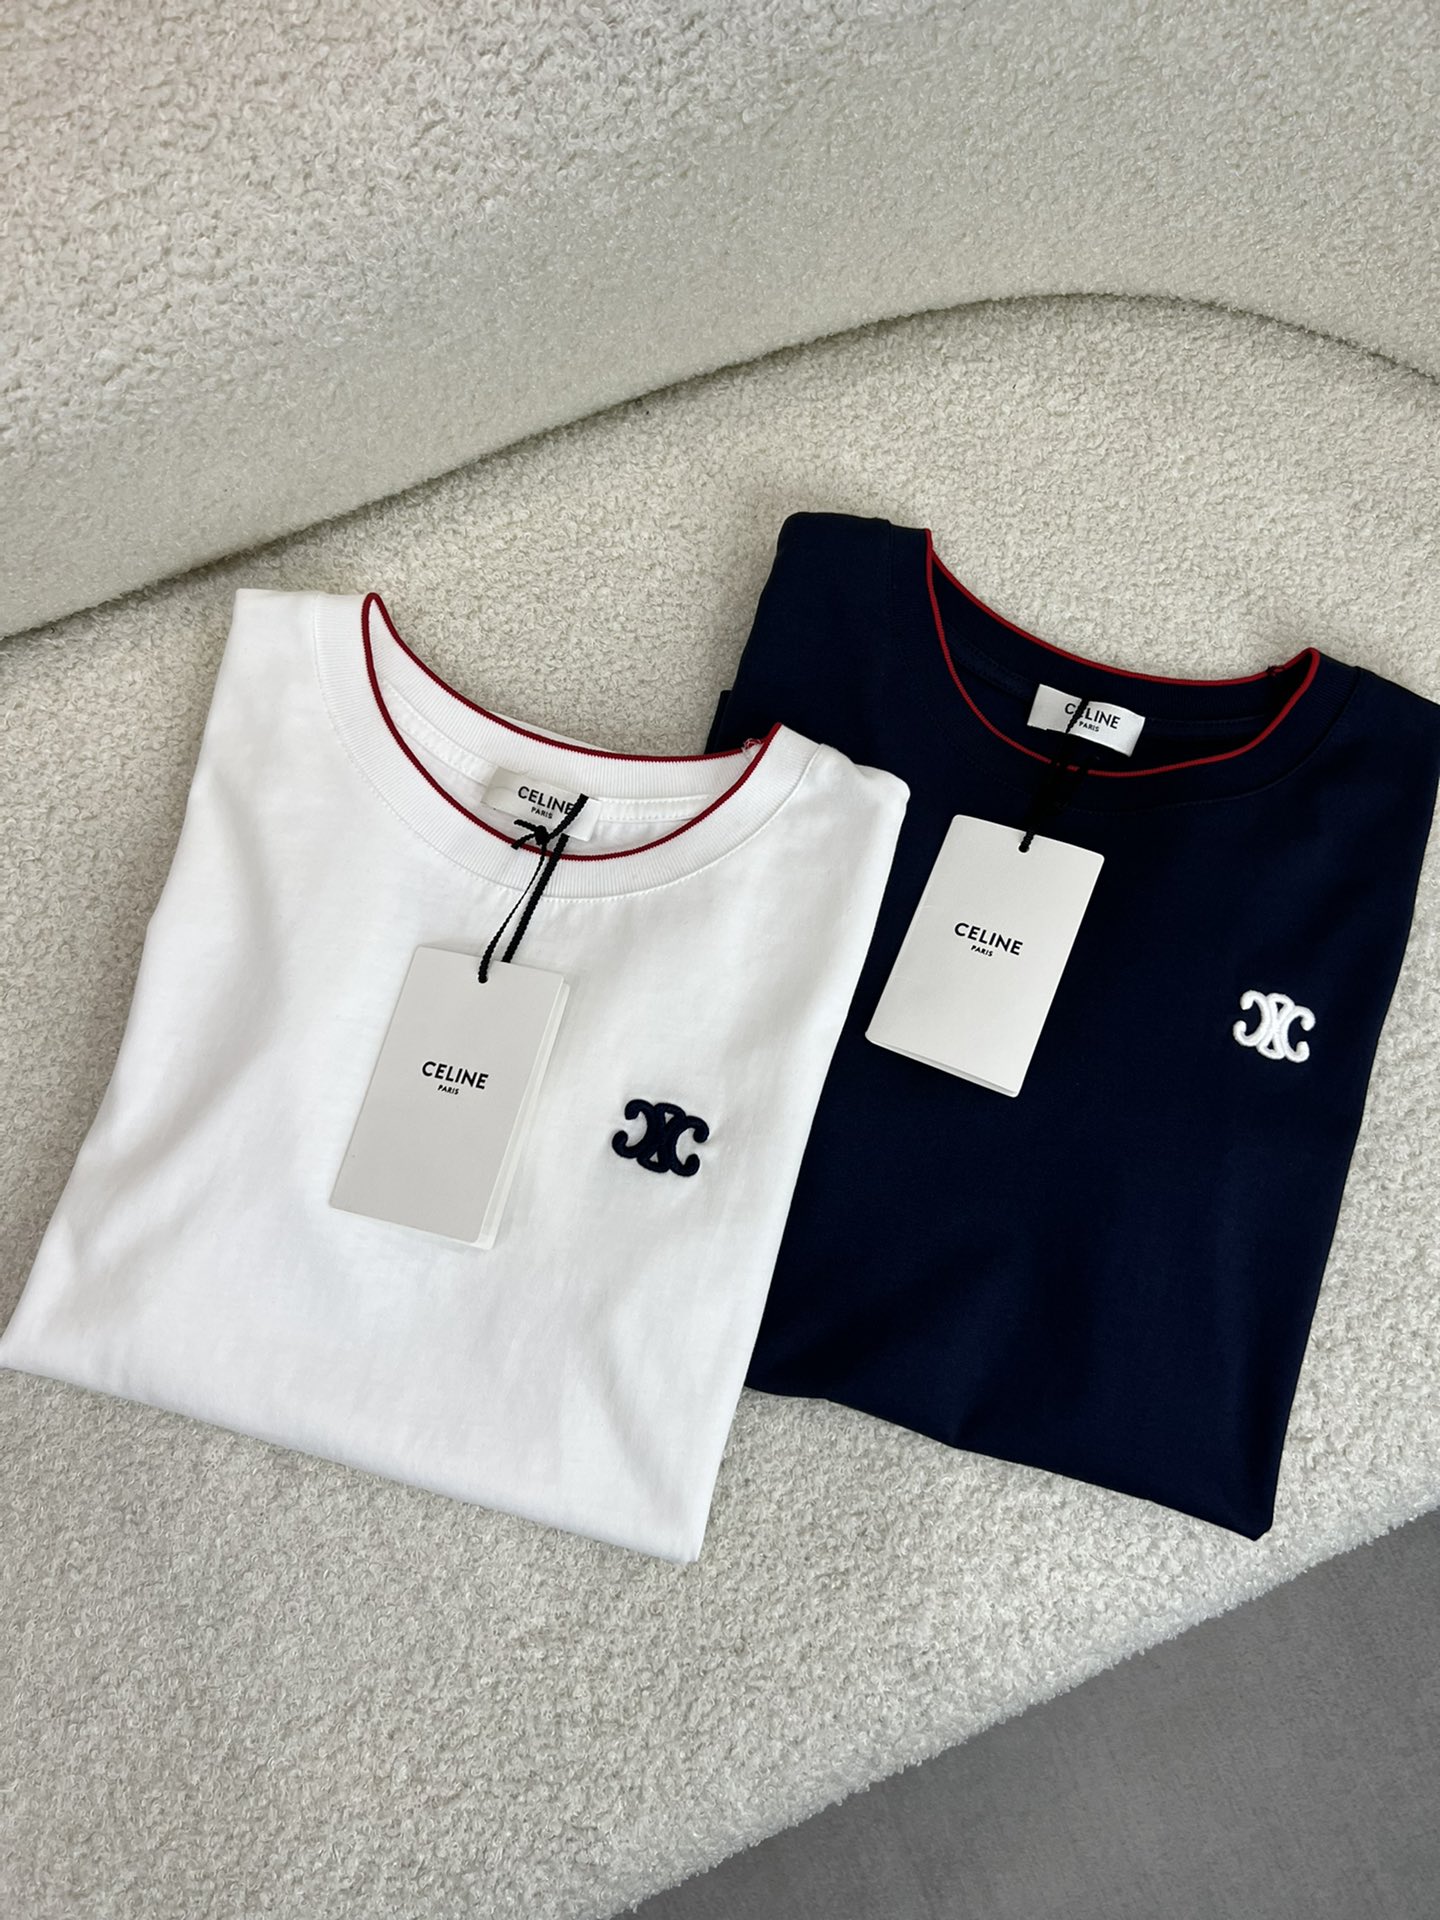 2023 Luxury Replicas Celine Clothing T-Shirt Spring Collection